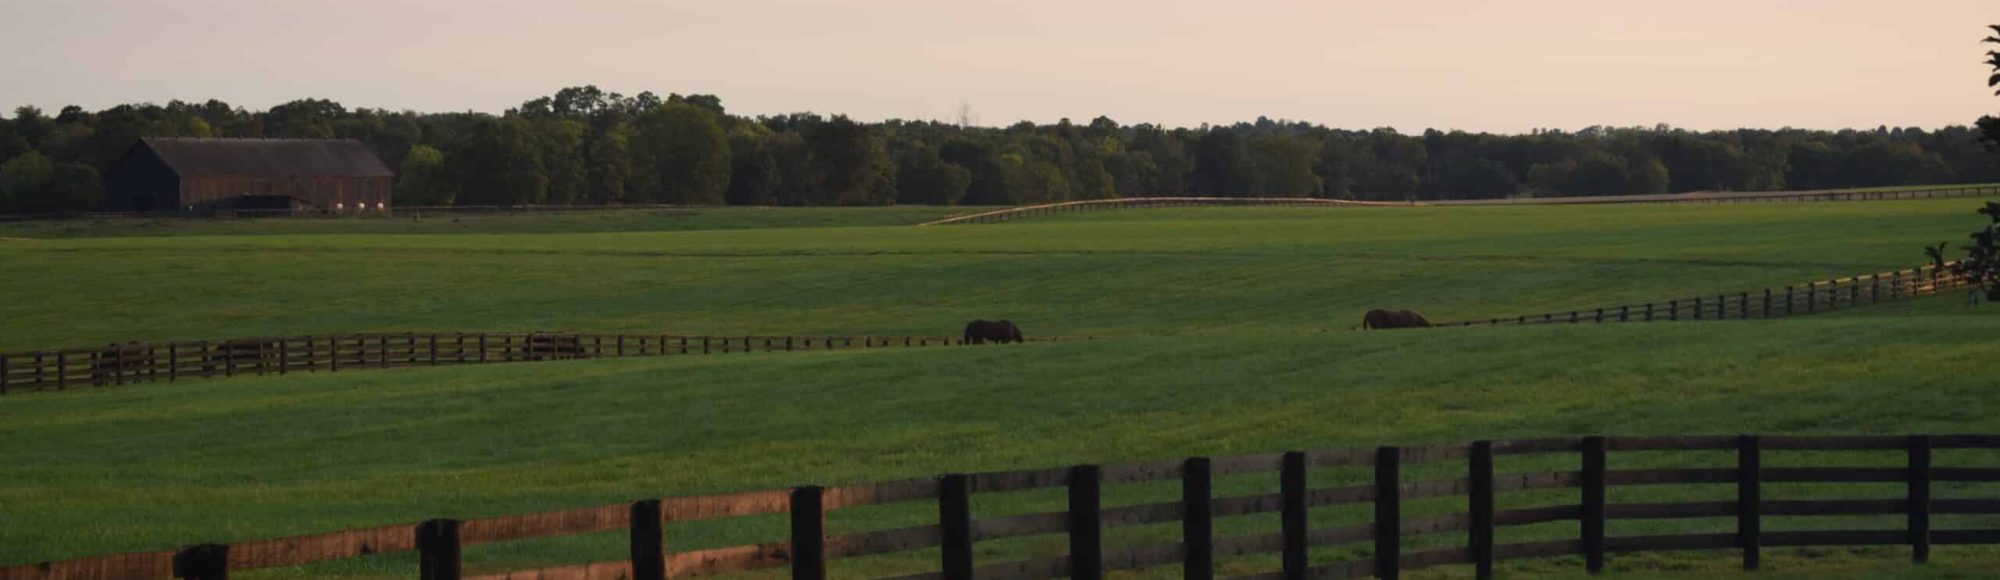 Livery Stable with horses grazing in a fenced in field on lush green grass